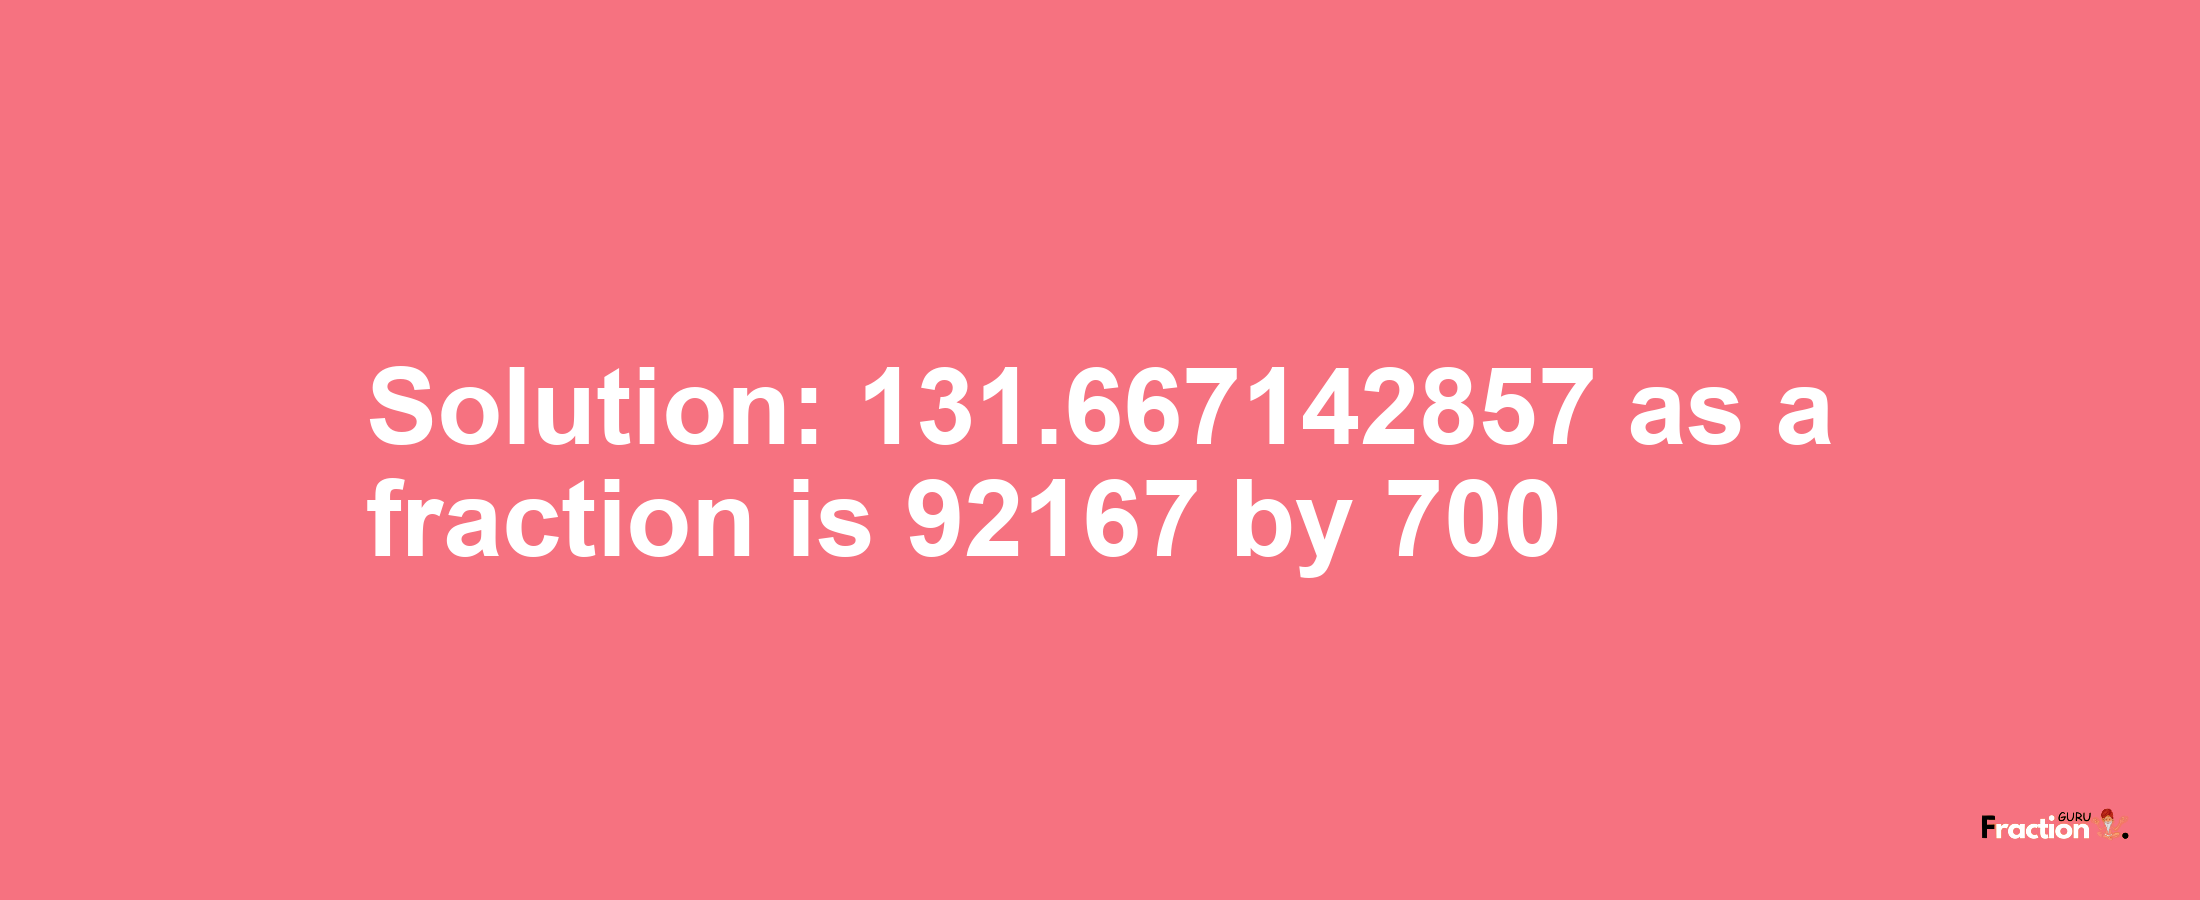 Solution:131.667142857 as a fraction is 92167/700